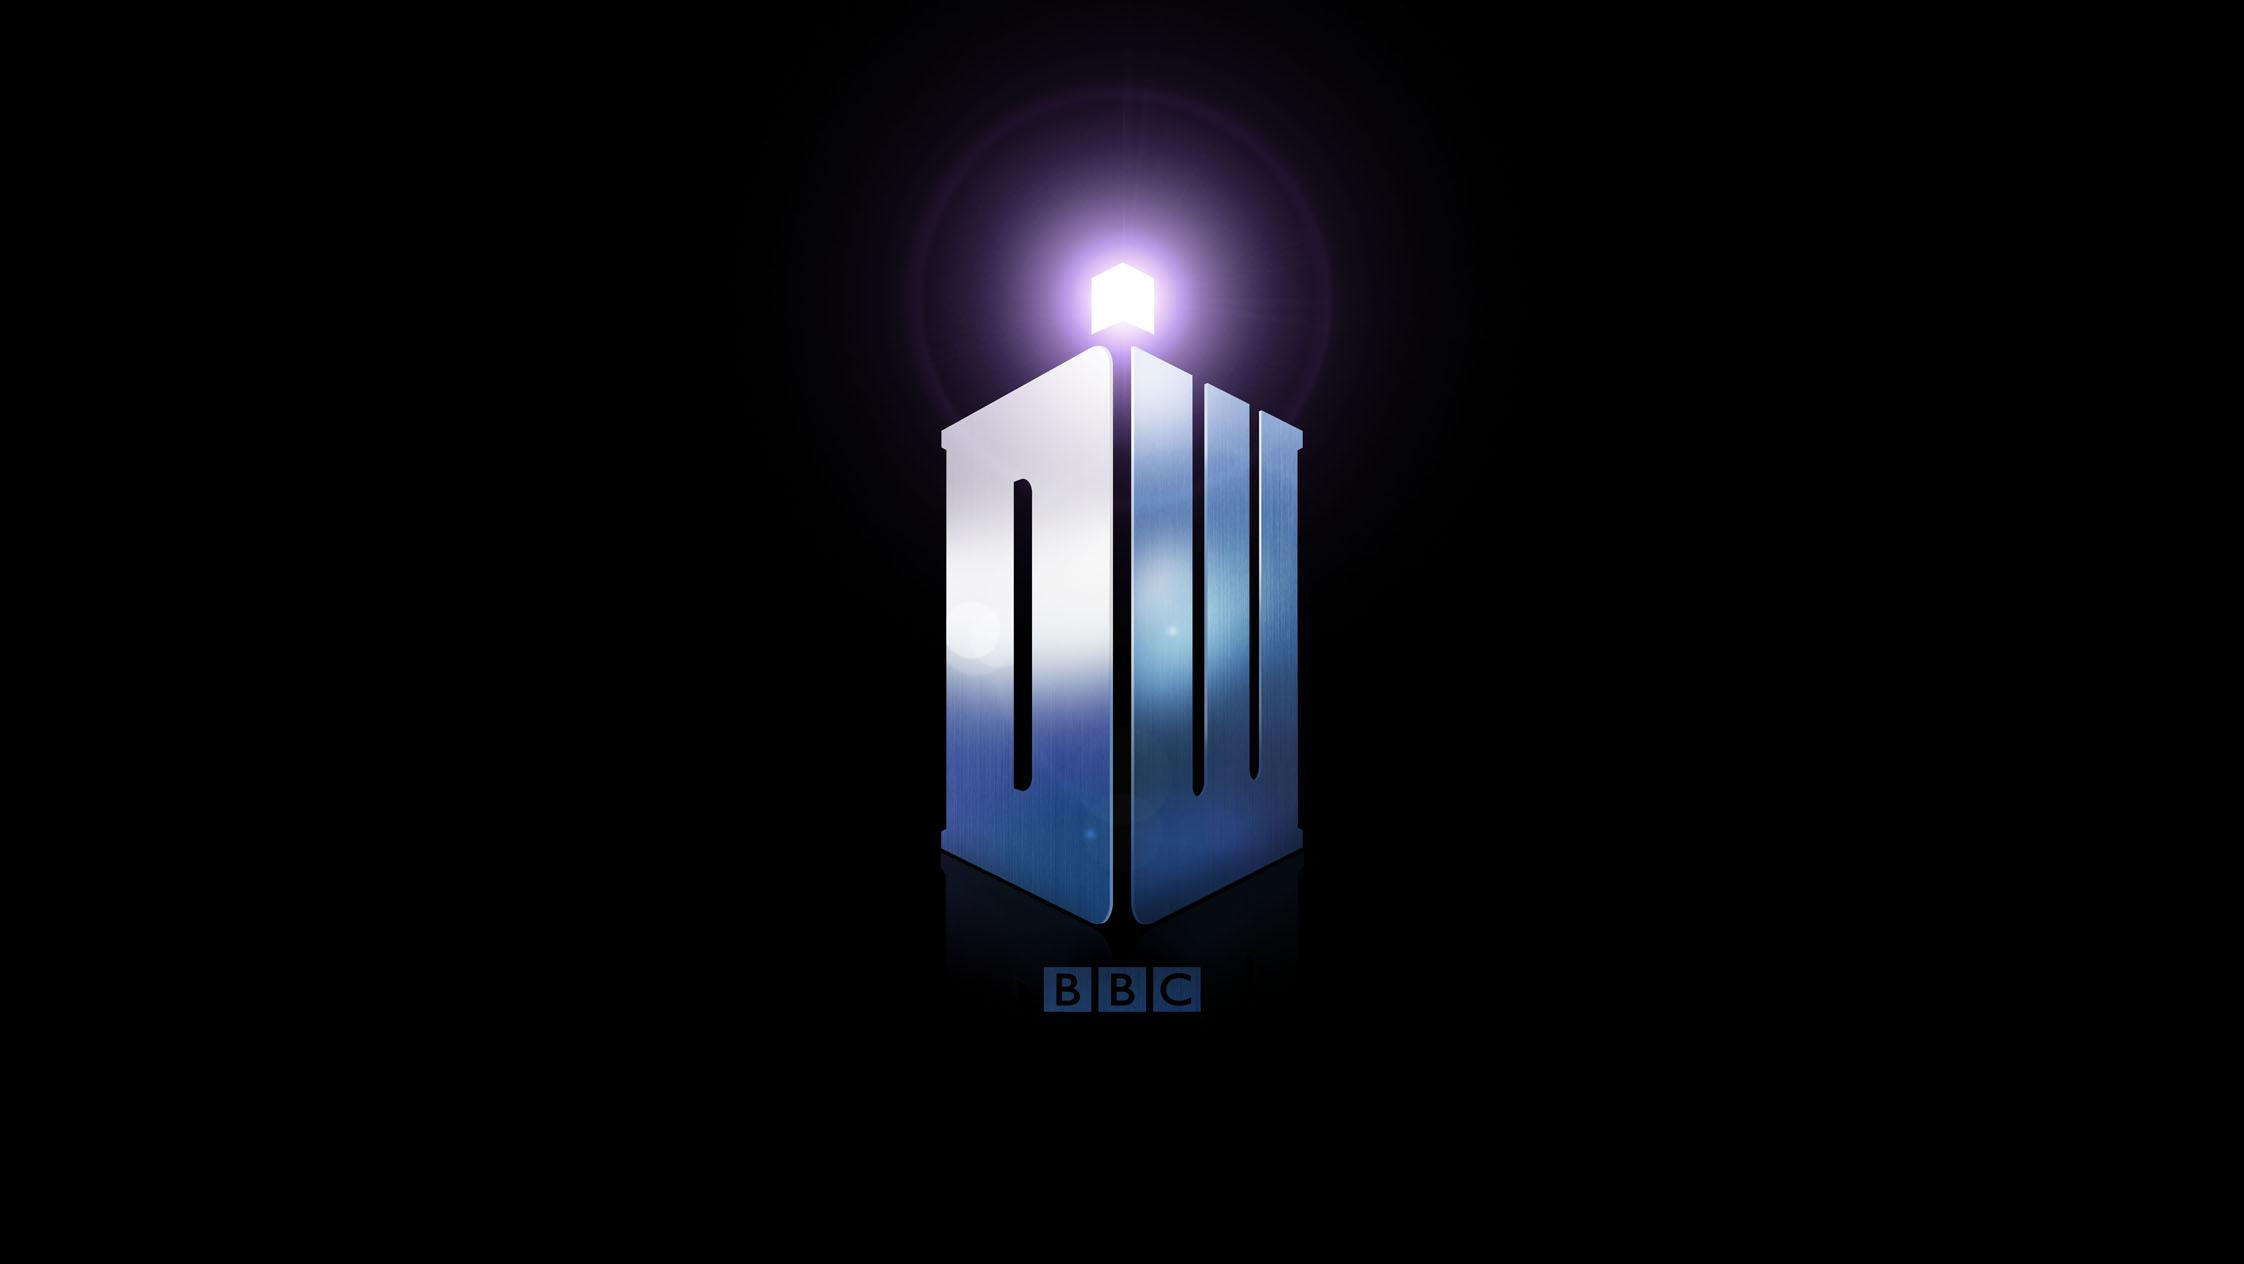 2244x1264 Doctor Who Christmas Iphone Wallpaper : Doctor who iphone wallpaper  wallpapersafari